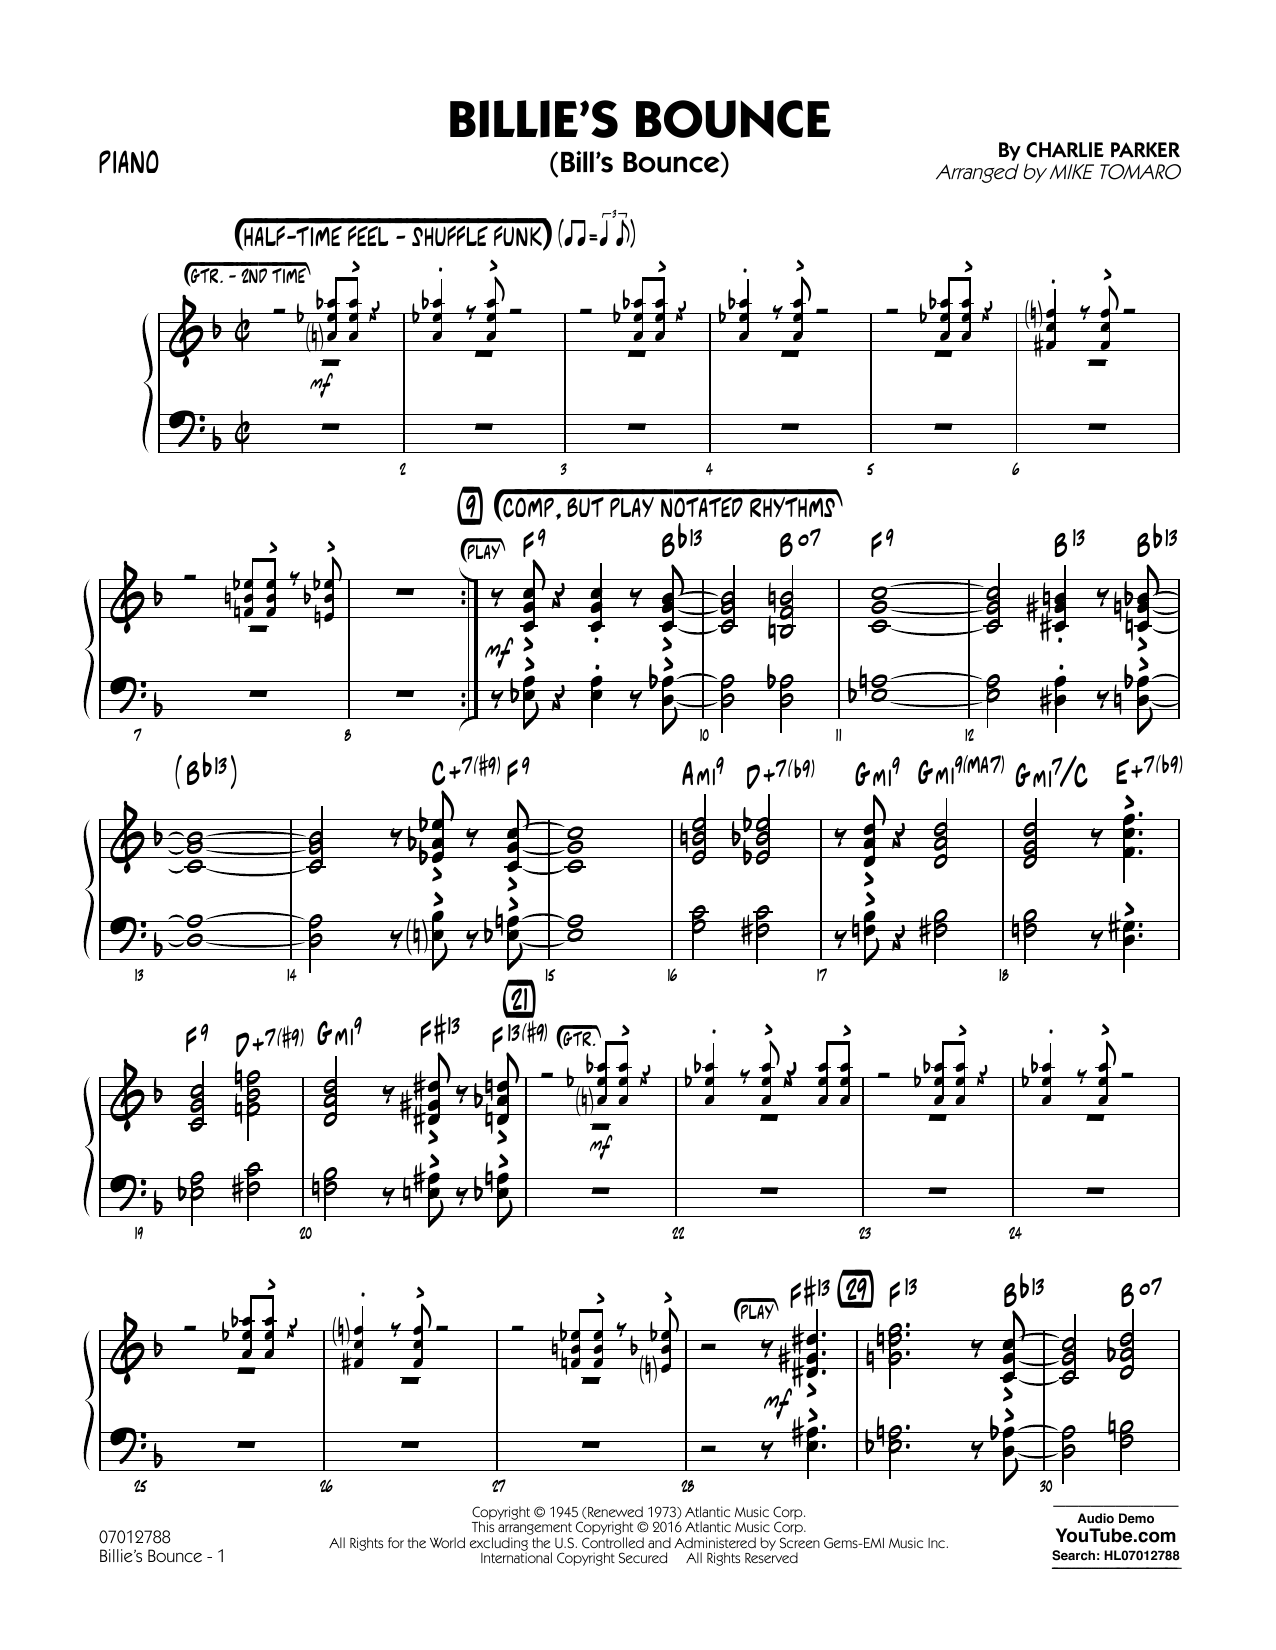 Download Mike Tomaro Billie's Bounce - Piano Sheet Music